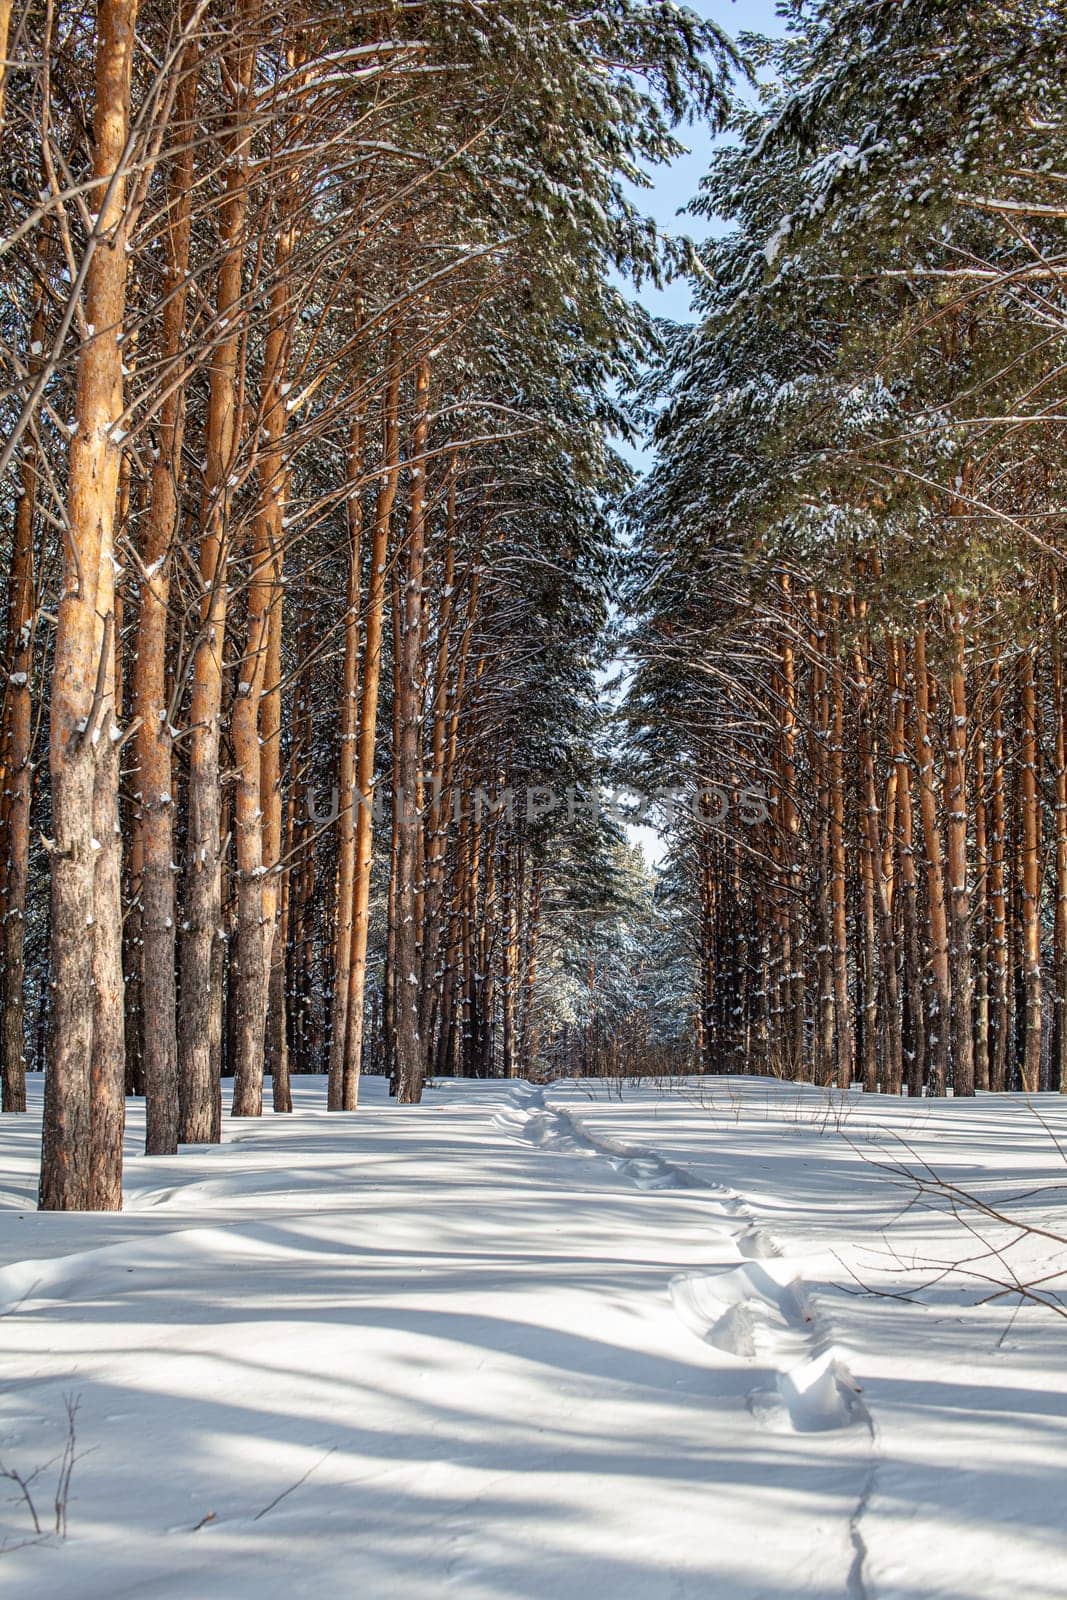 Winter road in a snowy forest, tall trees along the road. There is a lot of snow on the trees. Beautiful bright winter landscape. Winter season concept.